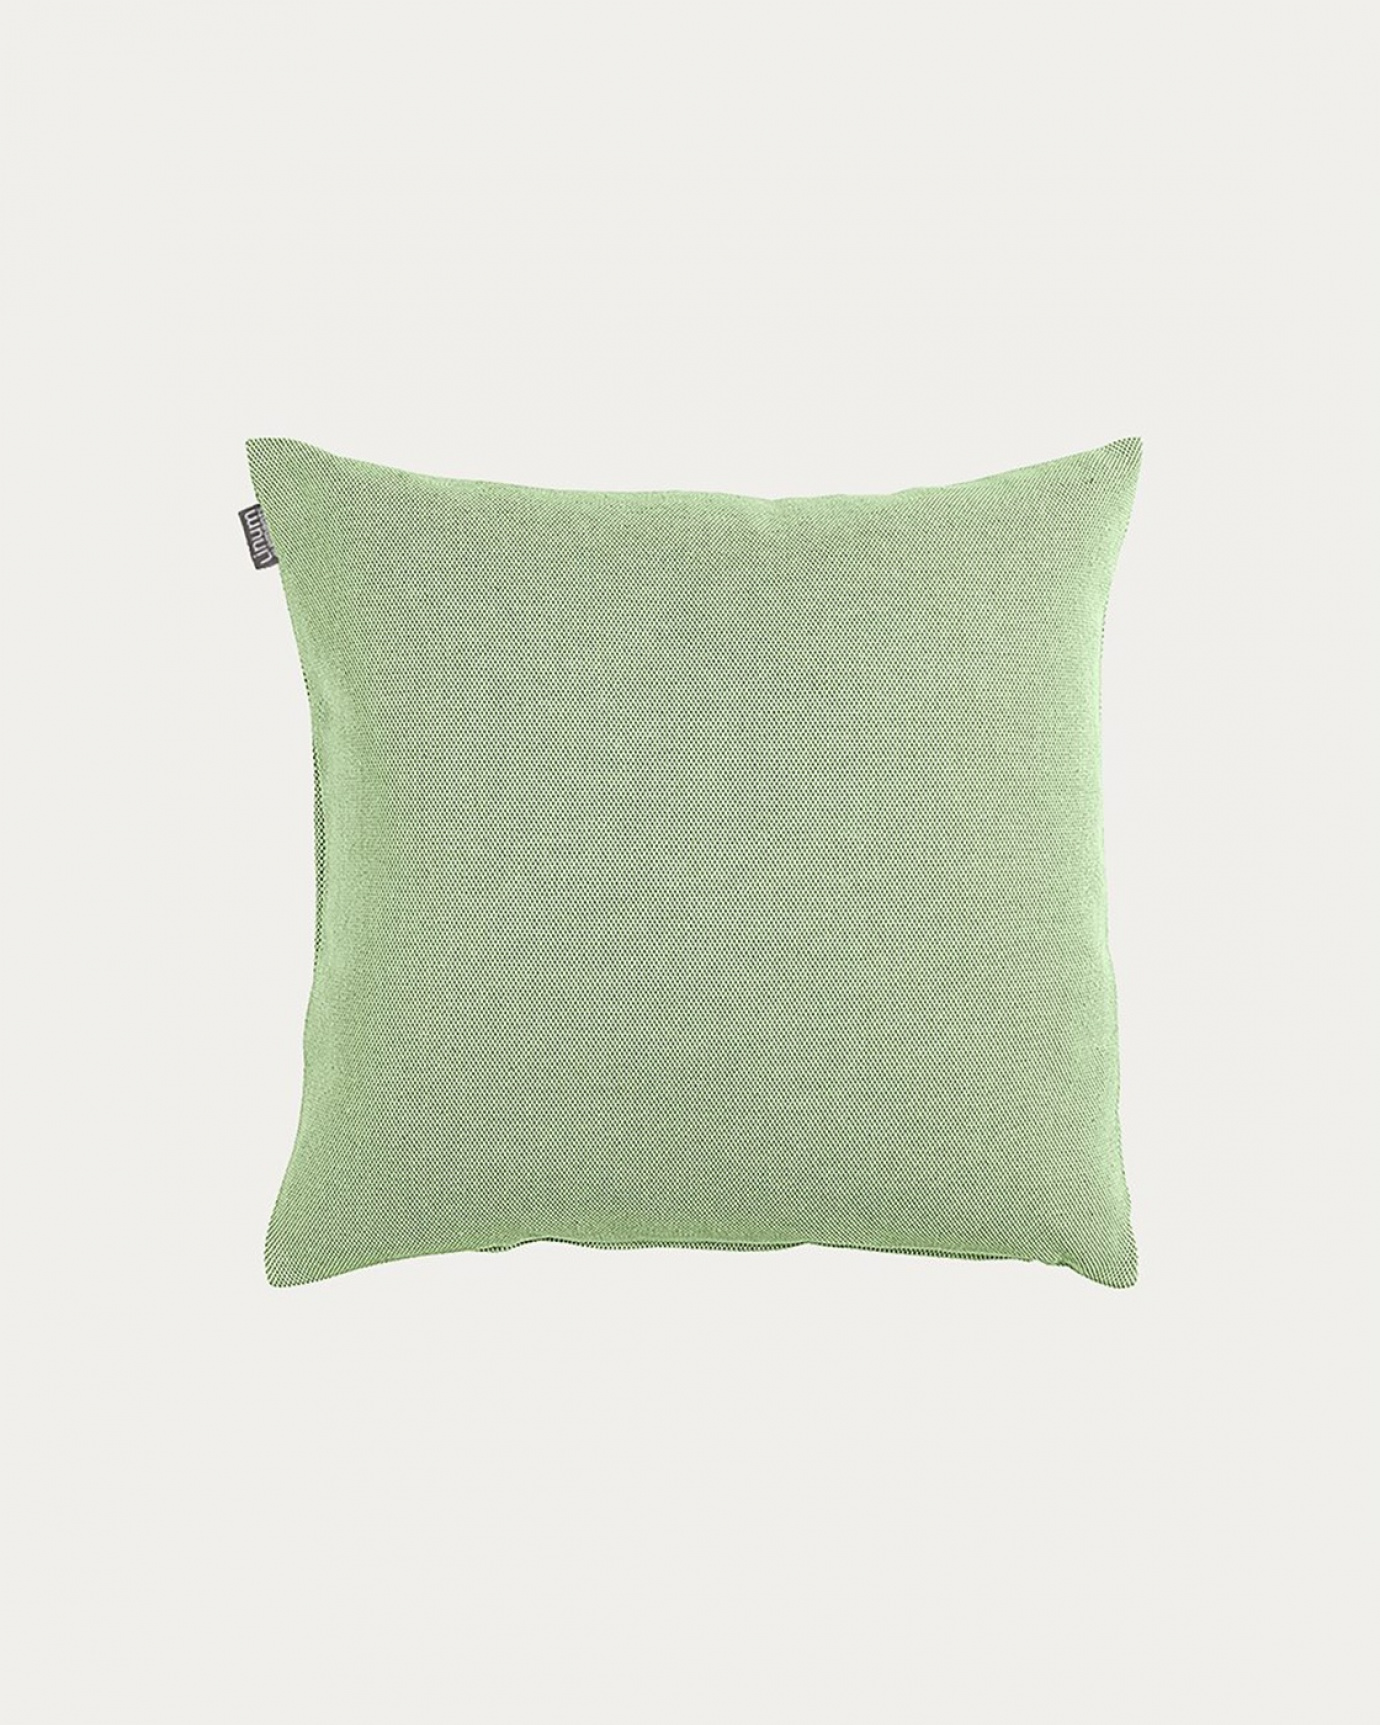 Product image dark linden green PEPPER cushion cover made of soft cotton from LINUM DESIGN. Easy to wash and durable for generations. Size 40x40 cm.